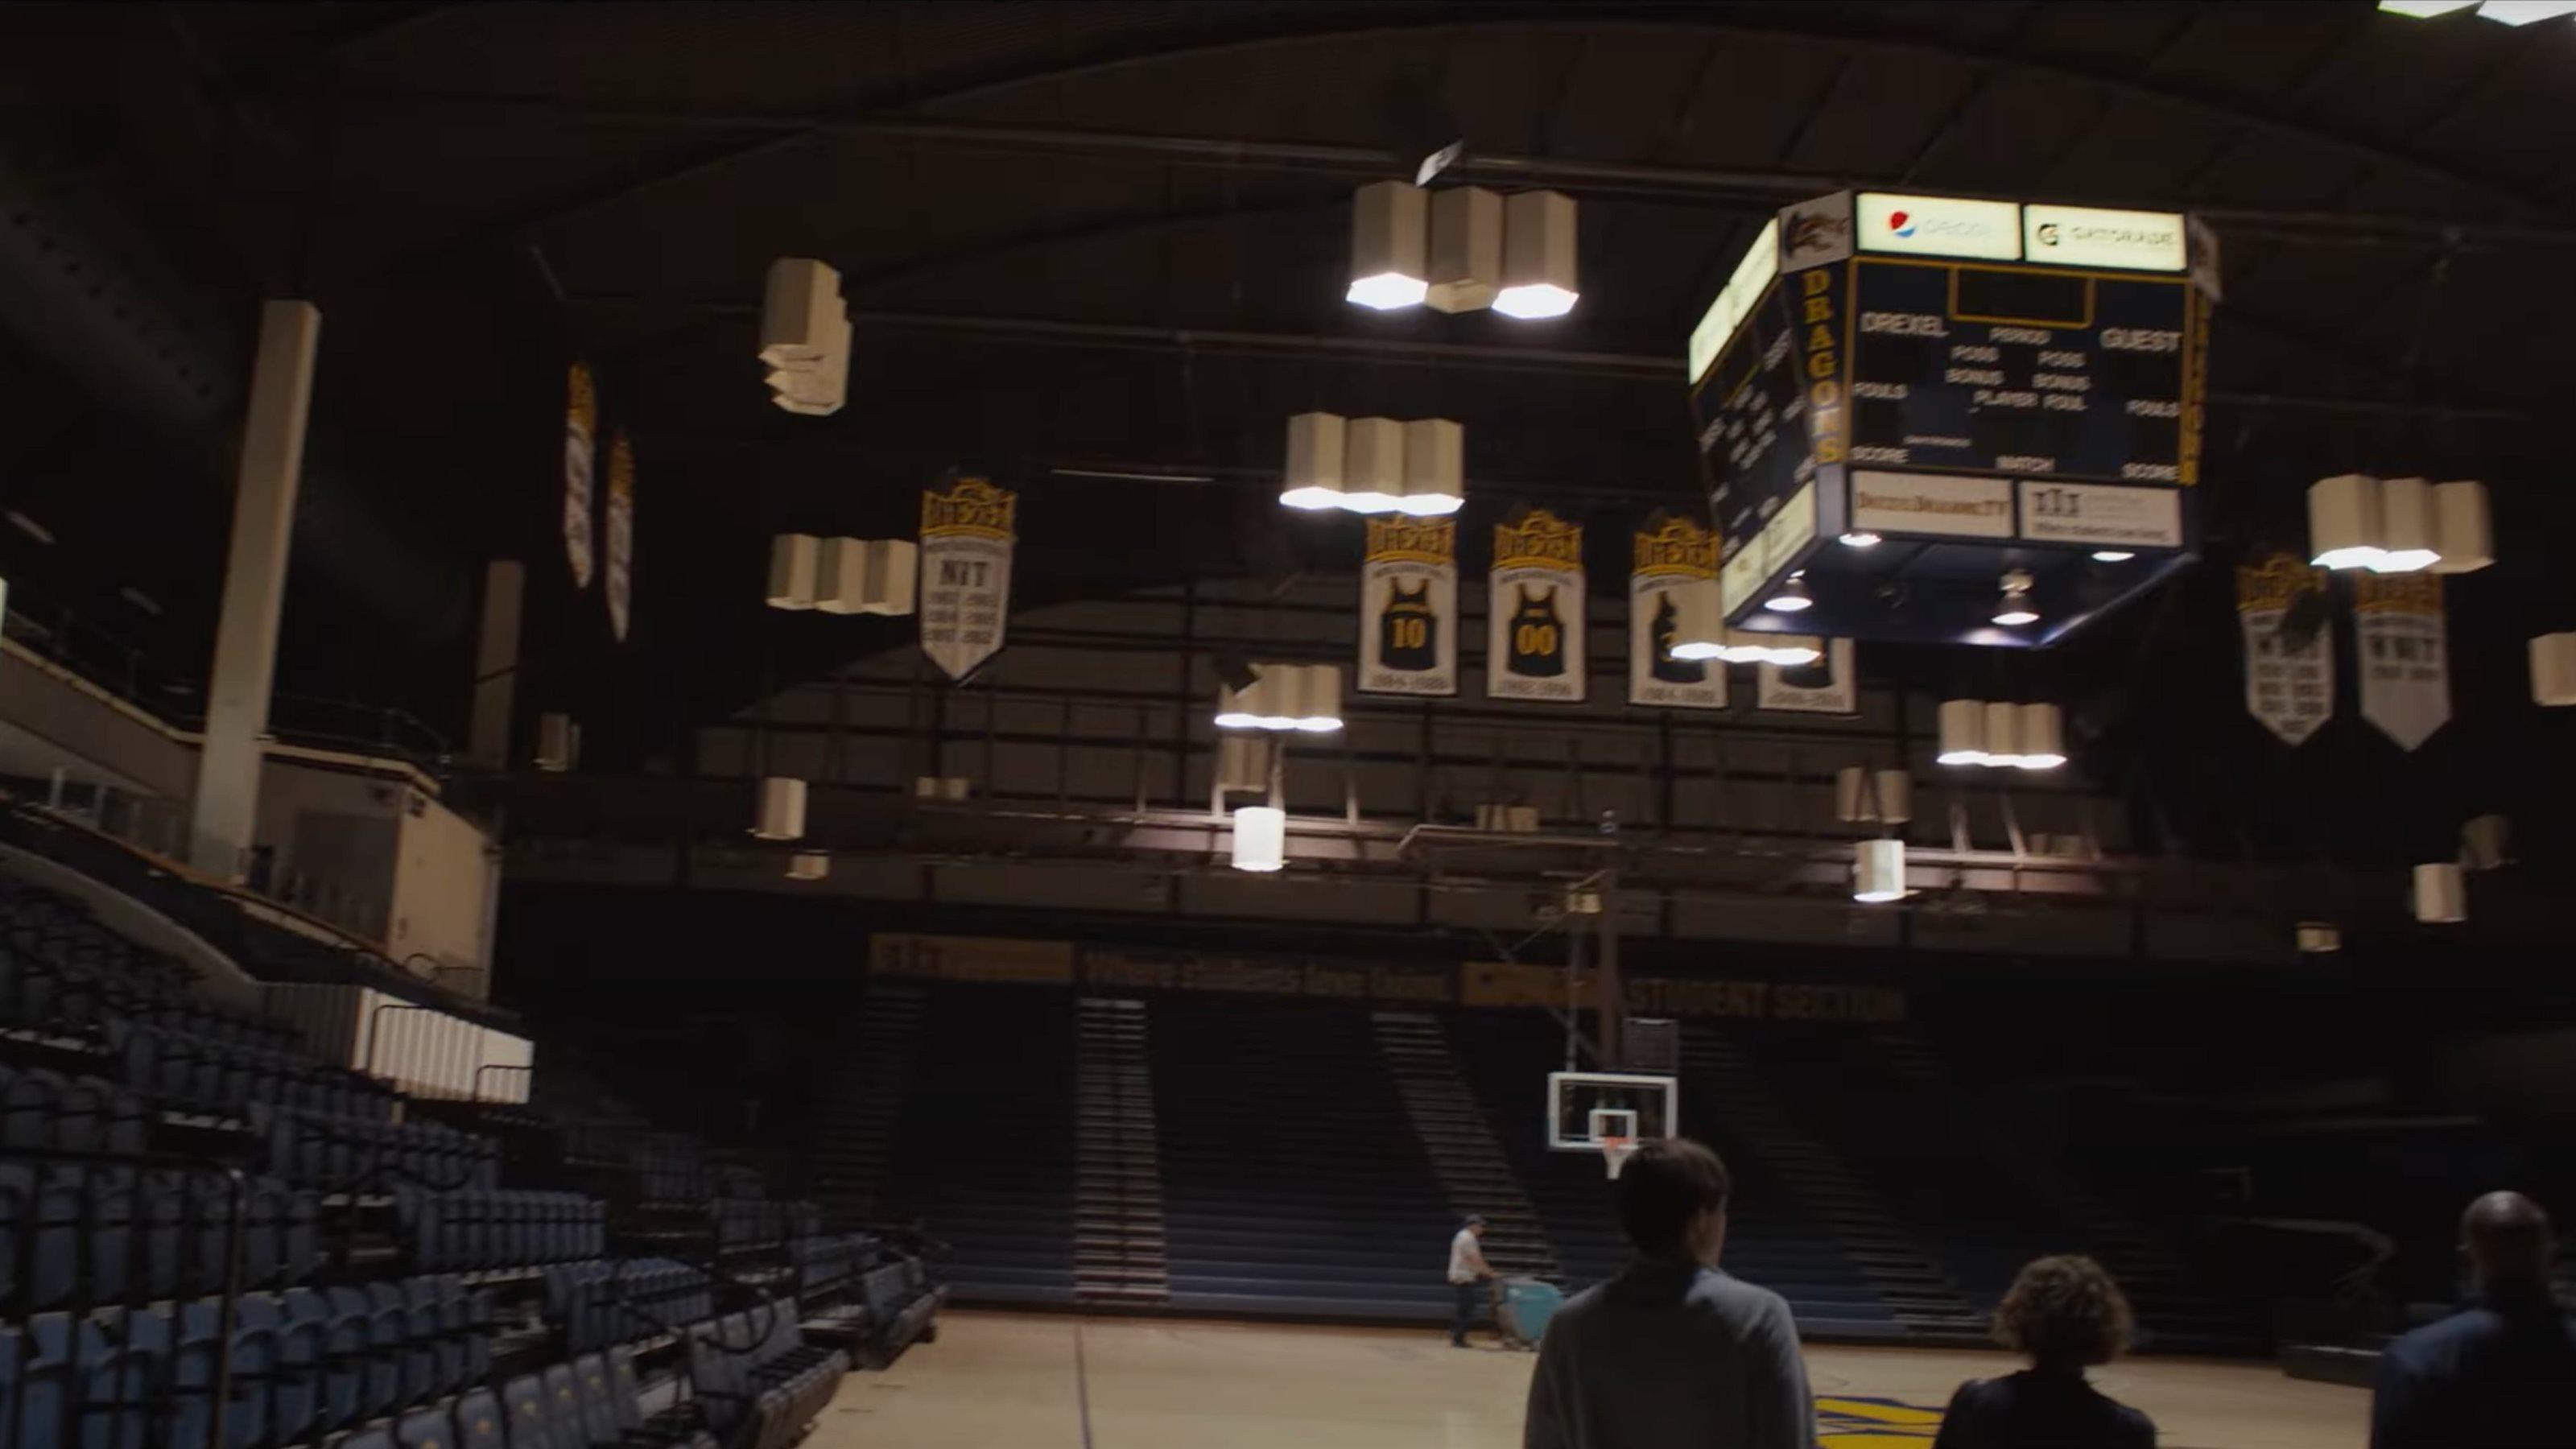 Image of hanging Drexel jerseys and the scoreboard over a basketball court people are walking on near the stands.